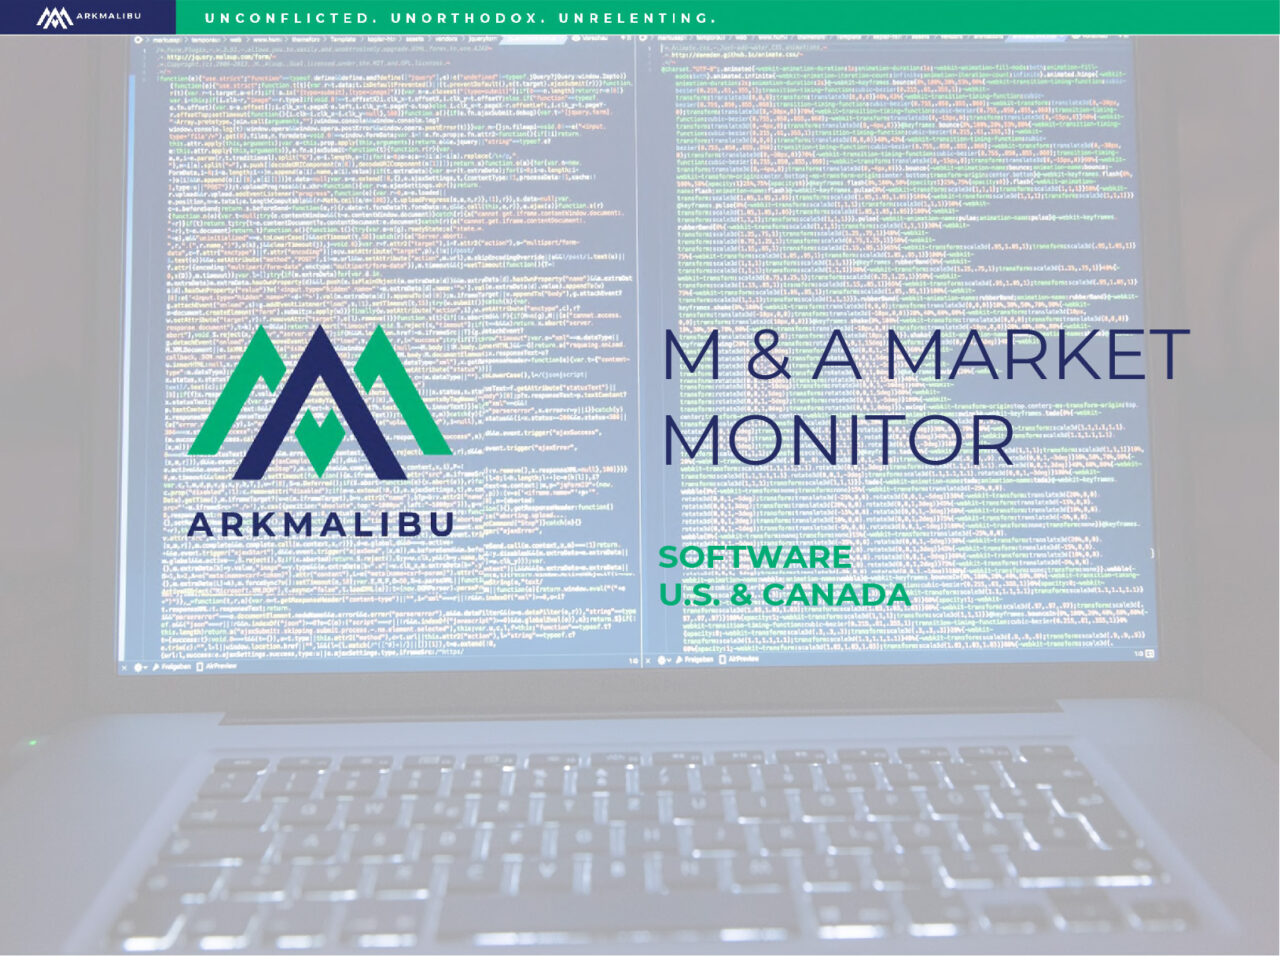 Market Monitor Cover for Software. Faded Image of a computer screen with code on it in the background